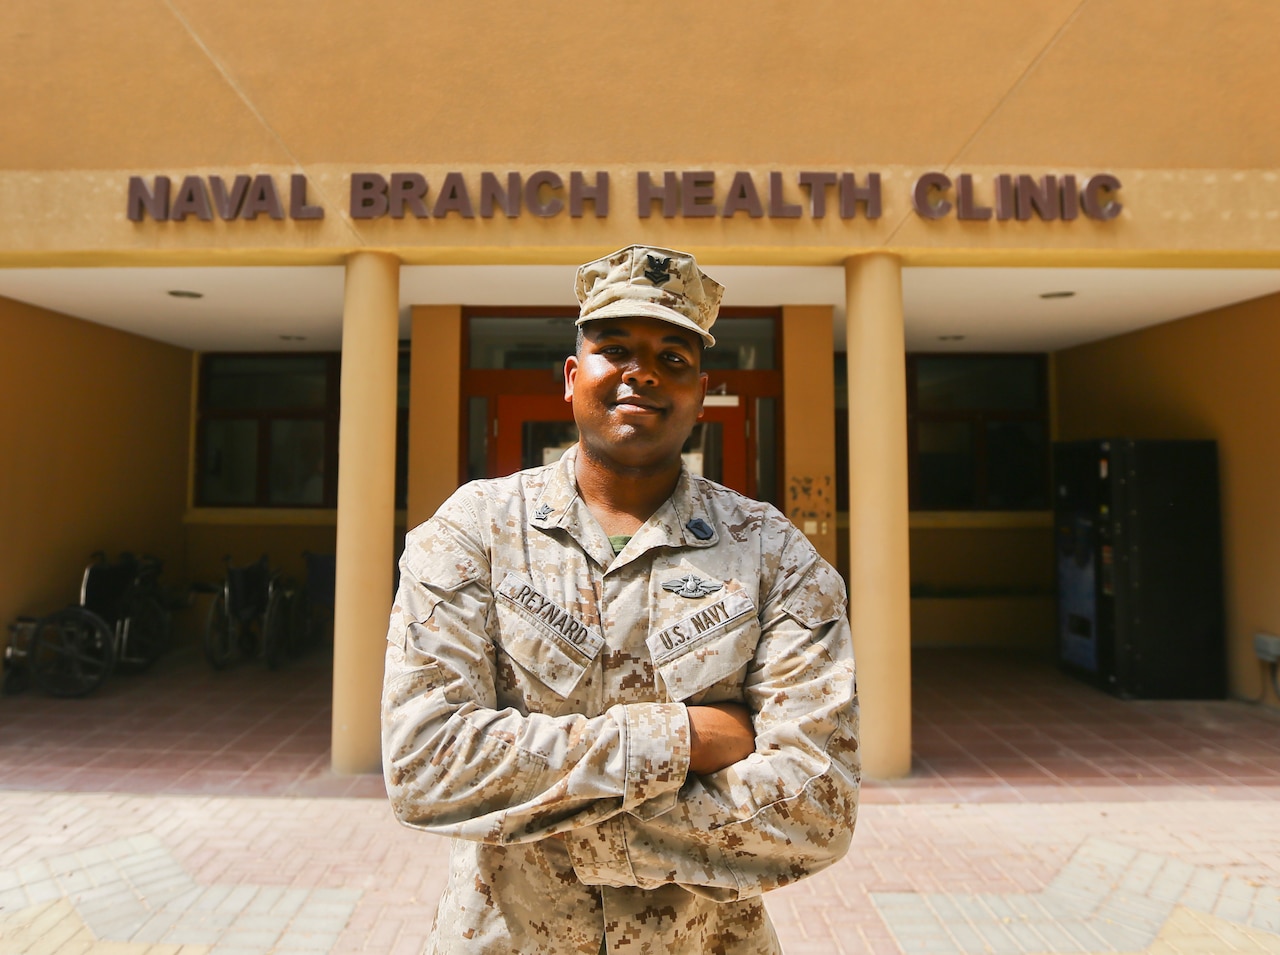 A sailor poses for a photo in front of a medical clinic.